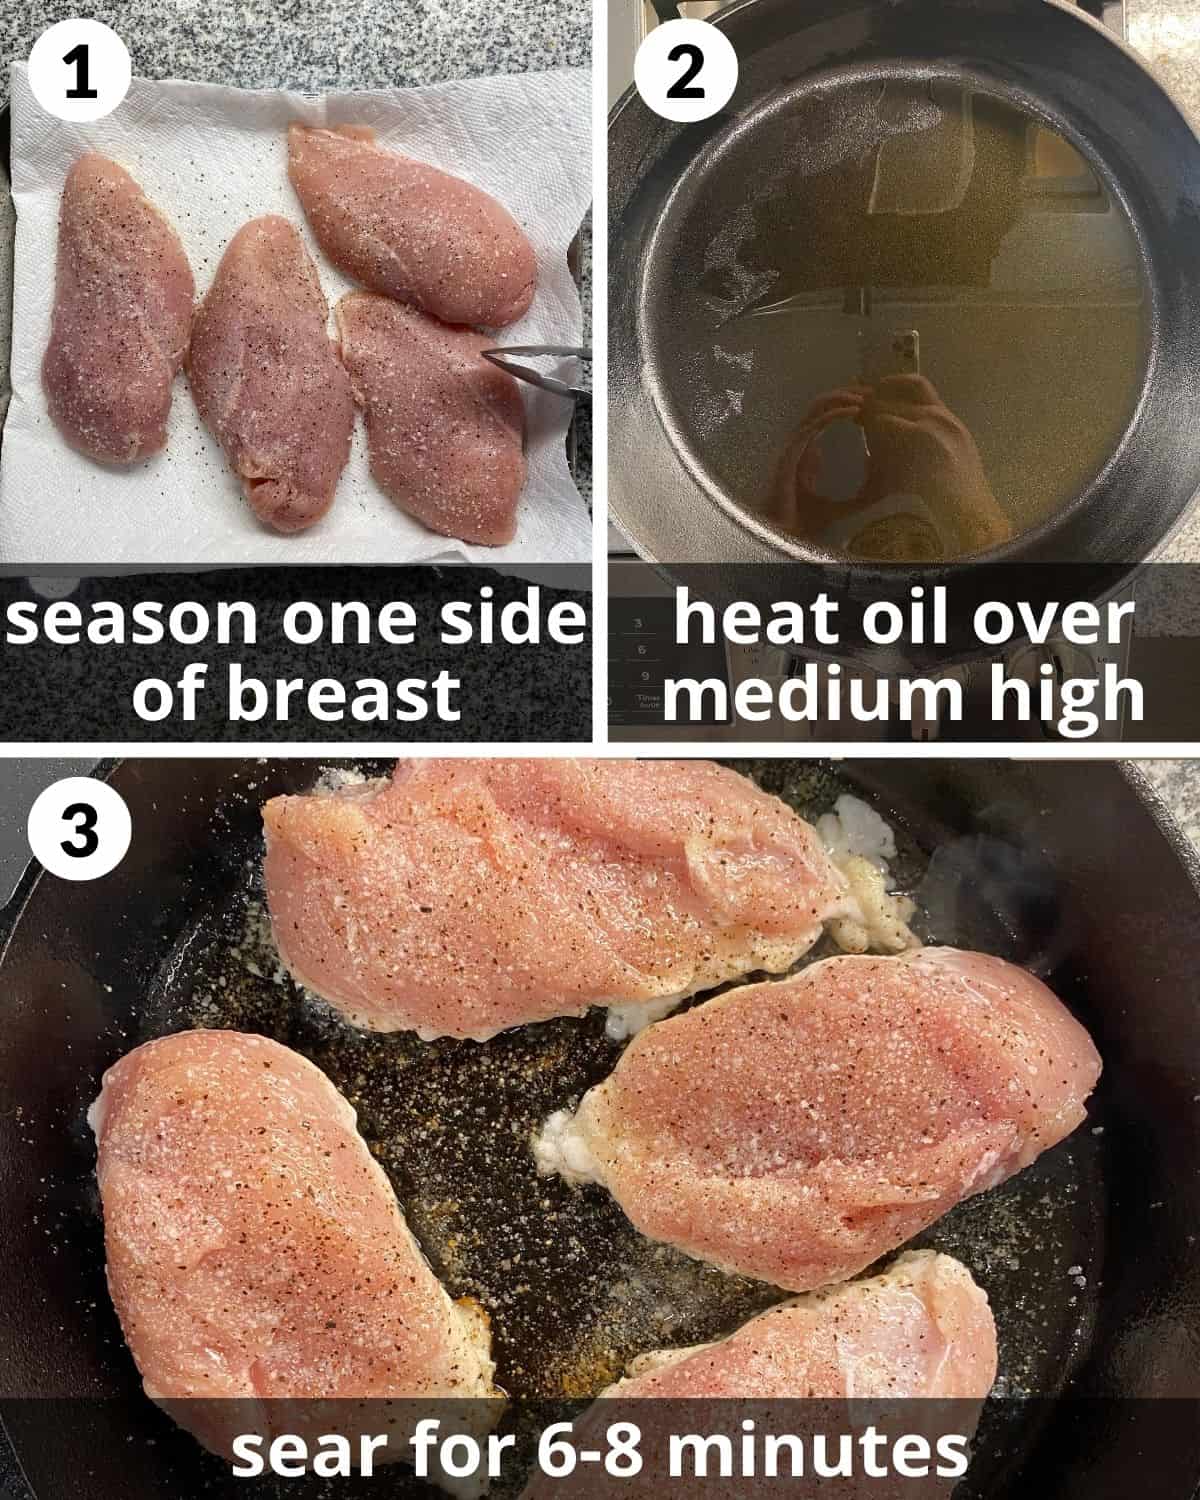 A 3 photo collage showing how to season and sear one side of chicken breast in cast iron skillet.